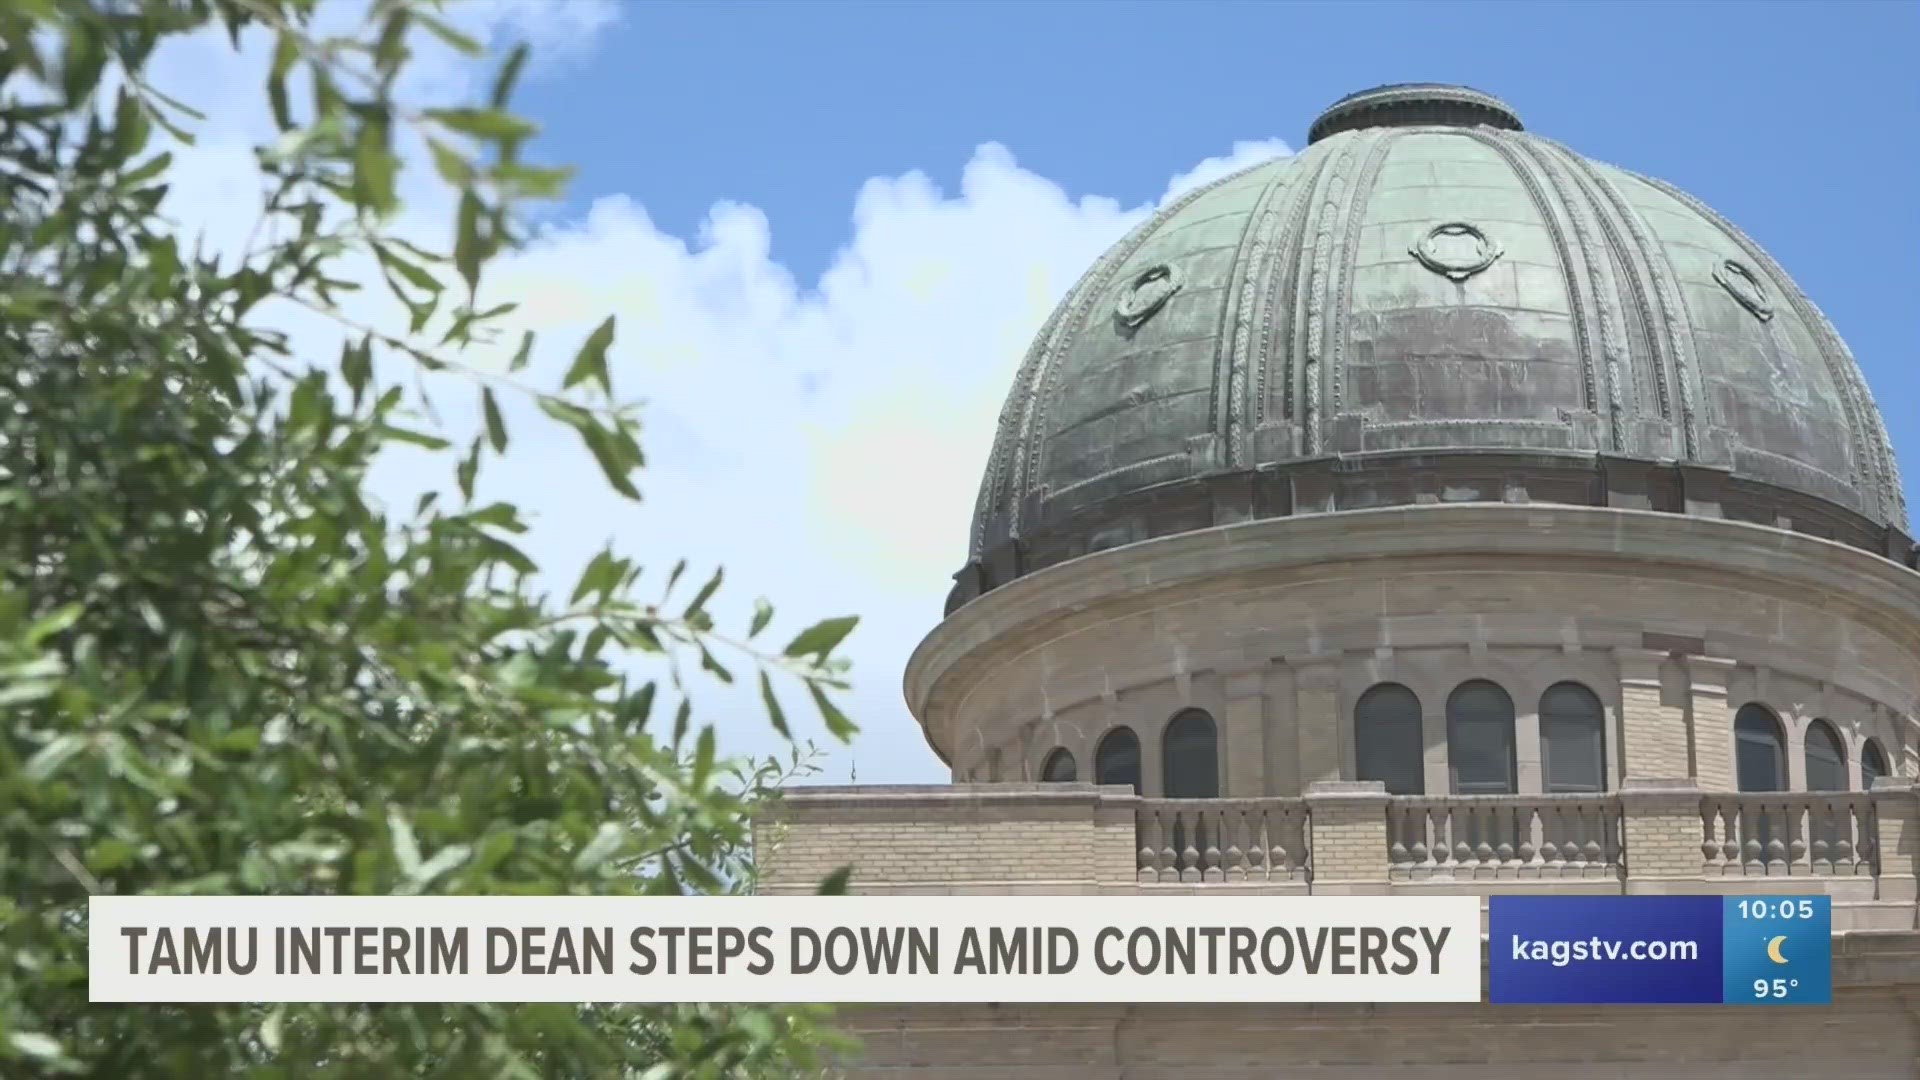 Nathan Crick, a journalism professor at Texas A&M, sat down with KAGS's Jordan Adams to discuss the controversies that have shaken TAMU in the past couple of weeks.